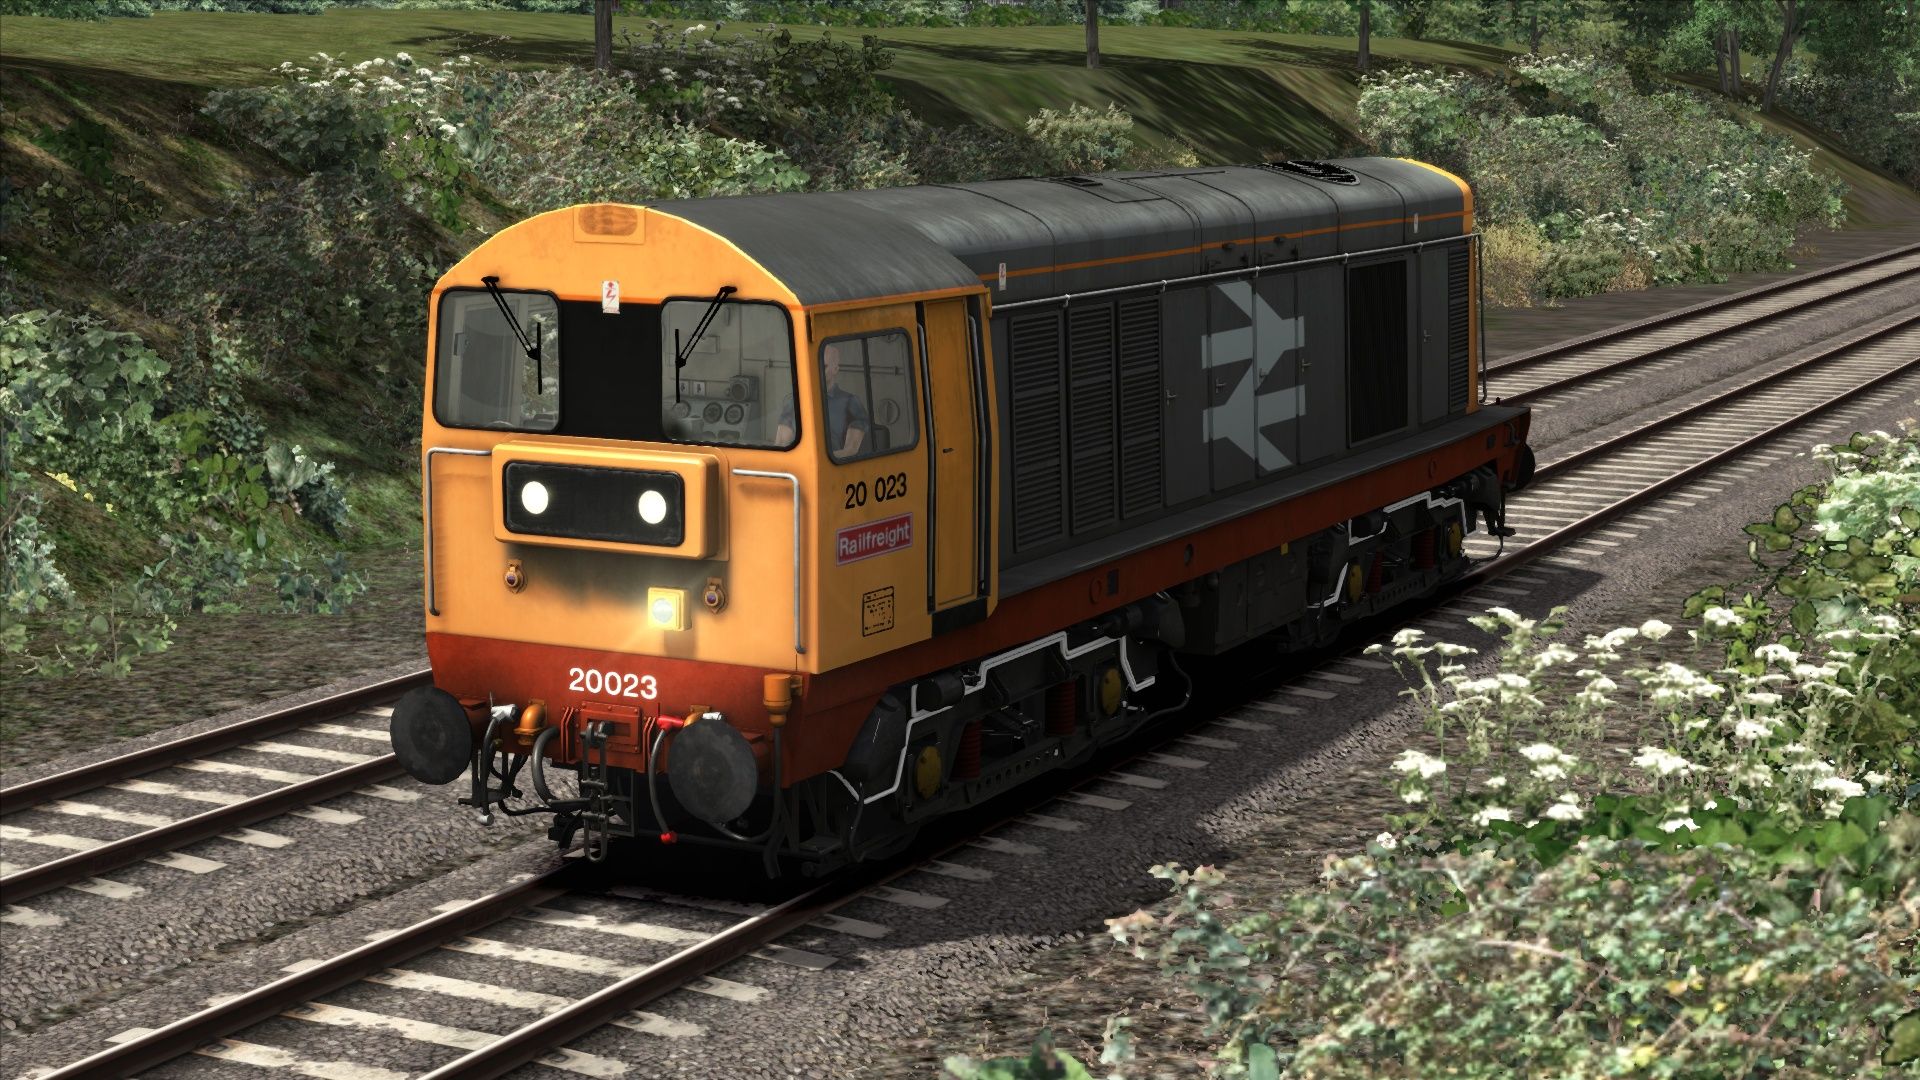 Image showing screenshot of the BR Railfreight Class 20 Add-On Livery on the TS Marketplace